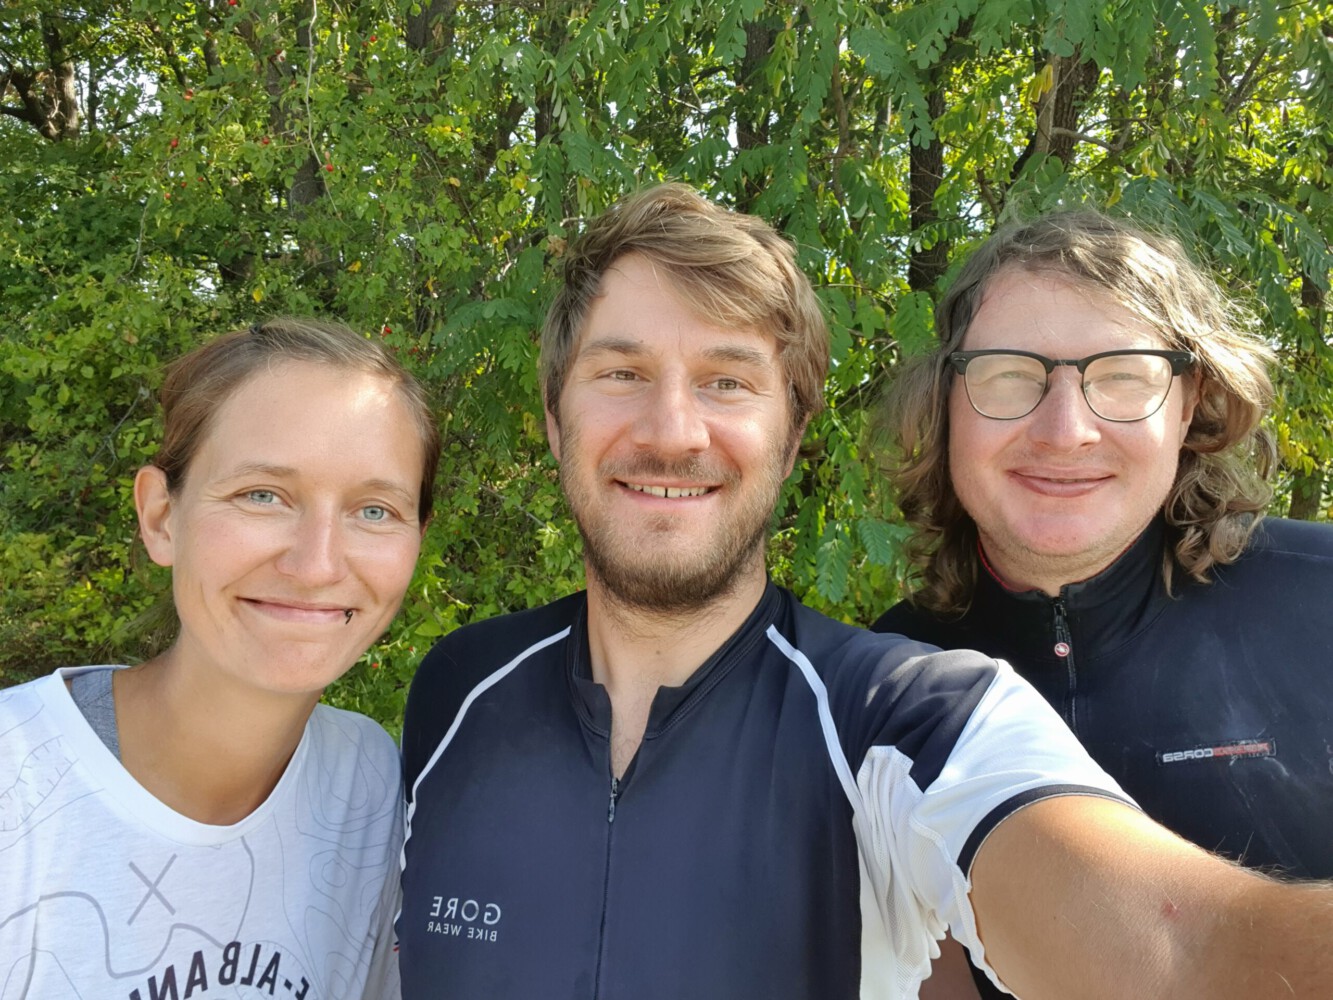 Met a guy from Belgium, Yves, also travelling the via Francigena by bike but in the other direction.